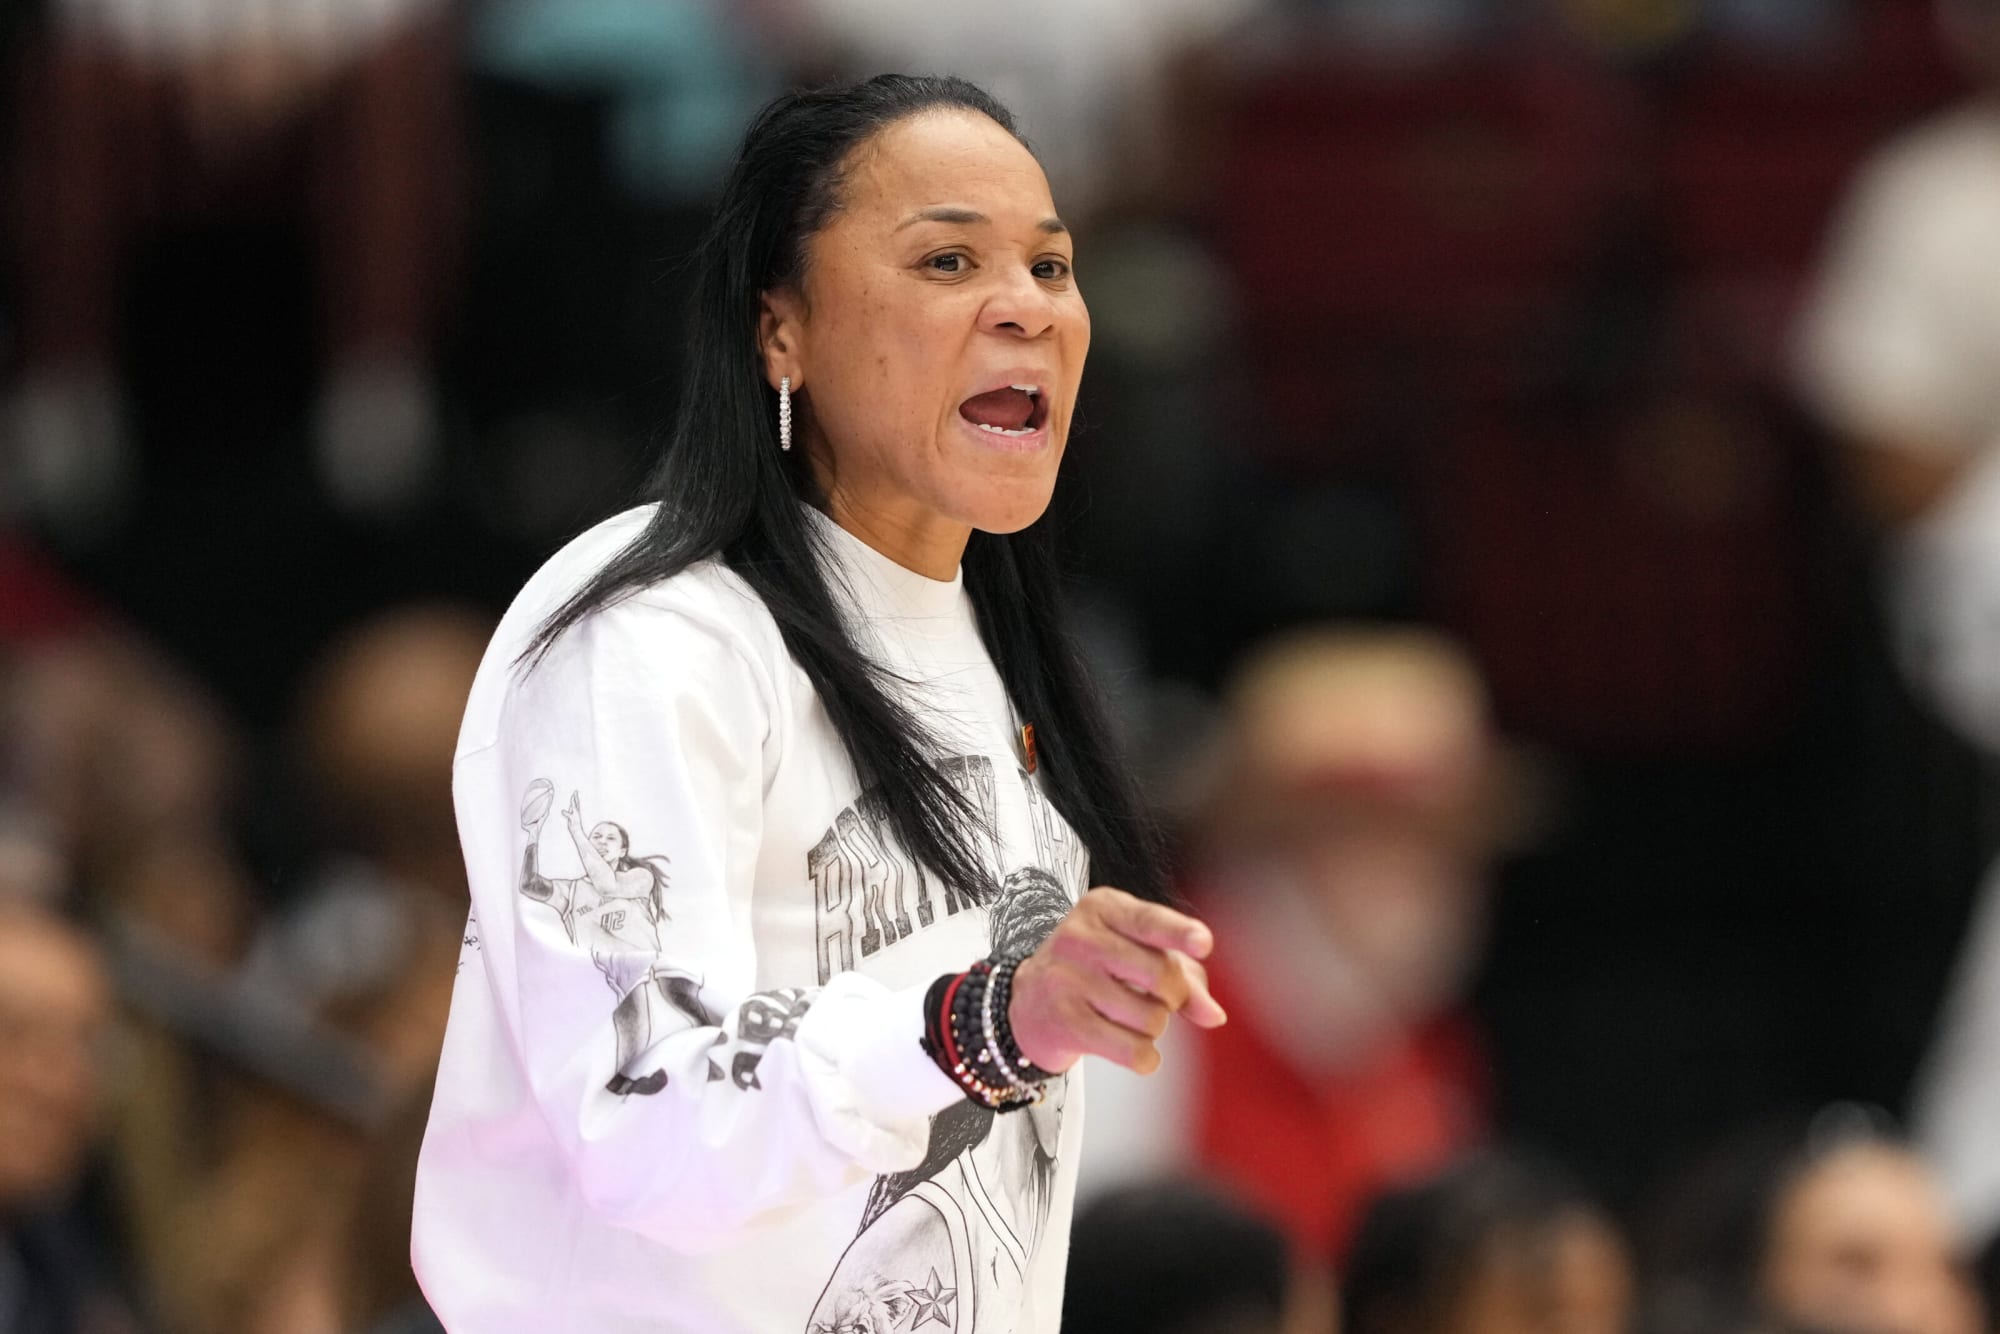 Dawn Staley won another national championship and did so in style.